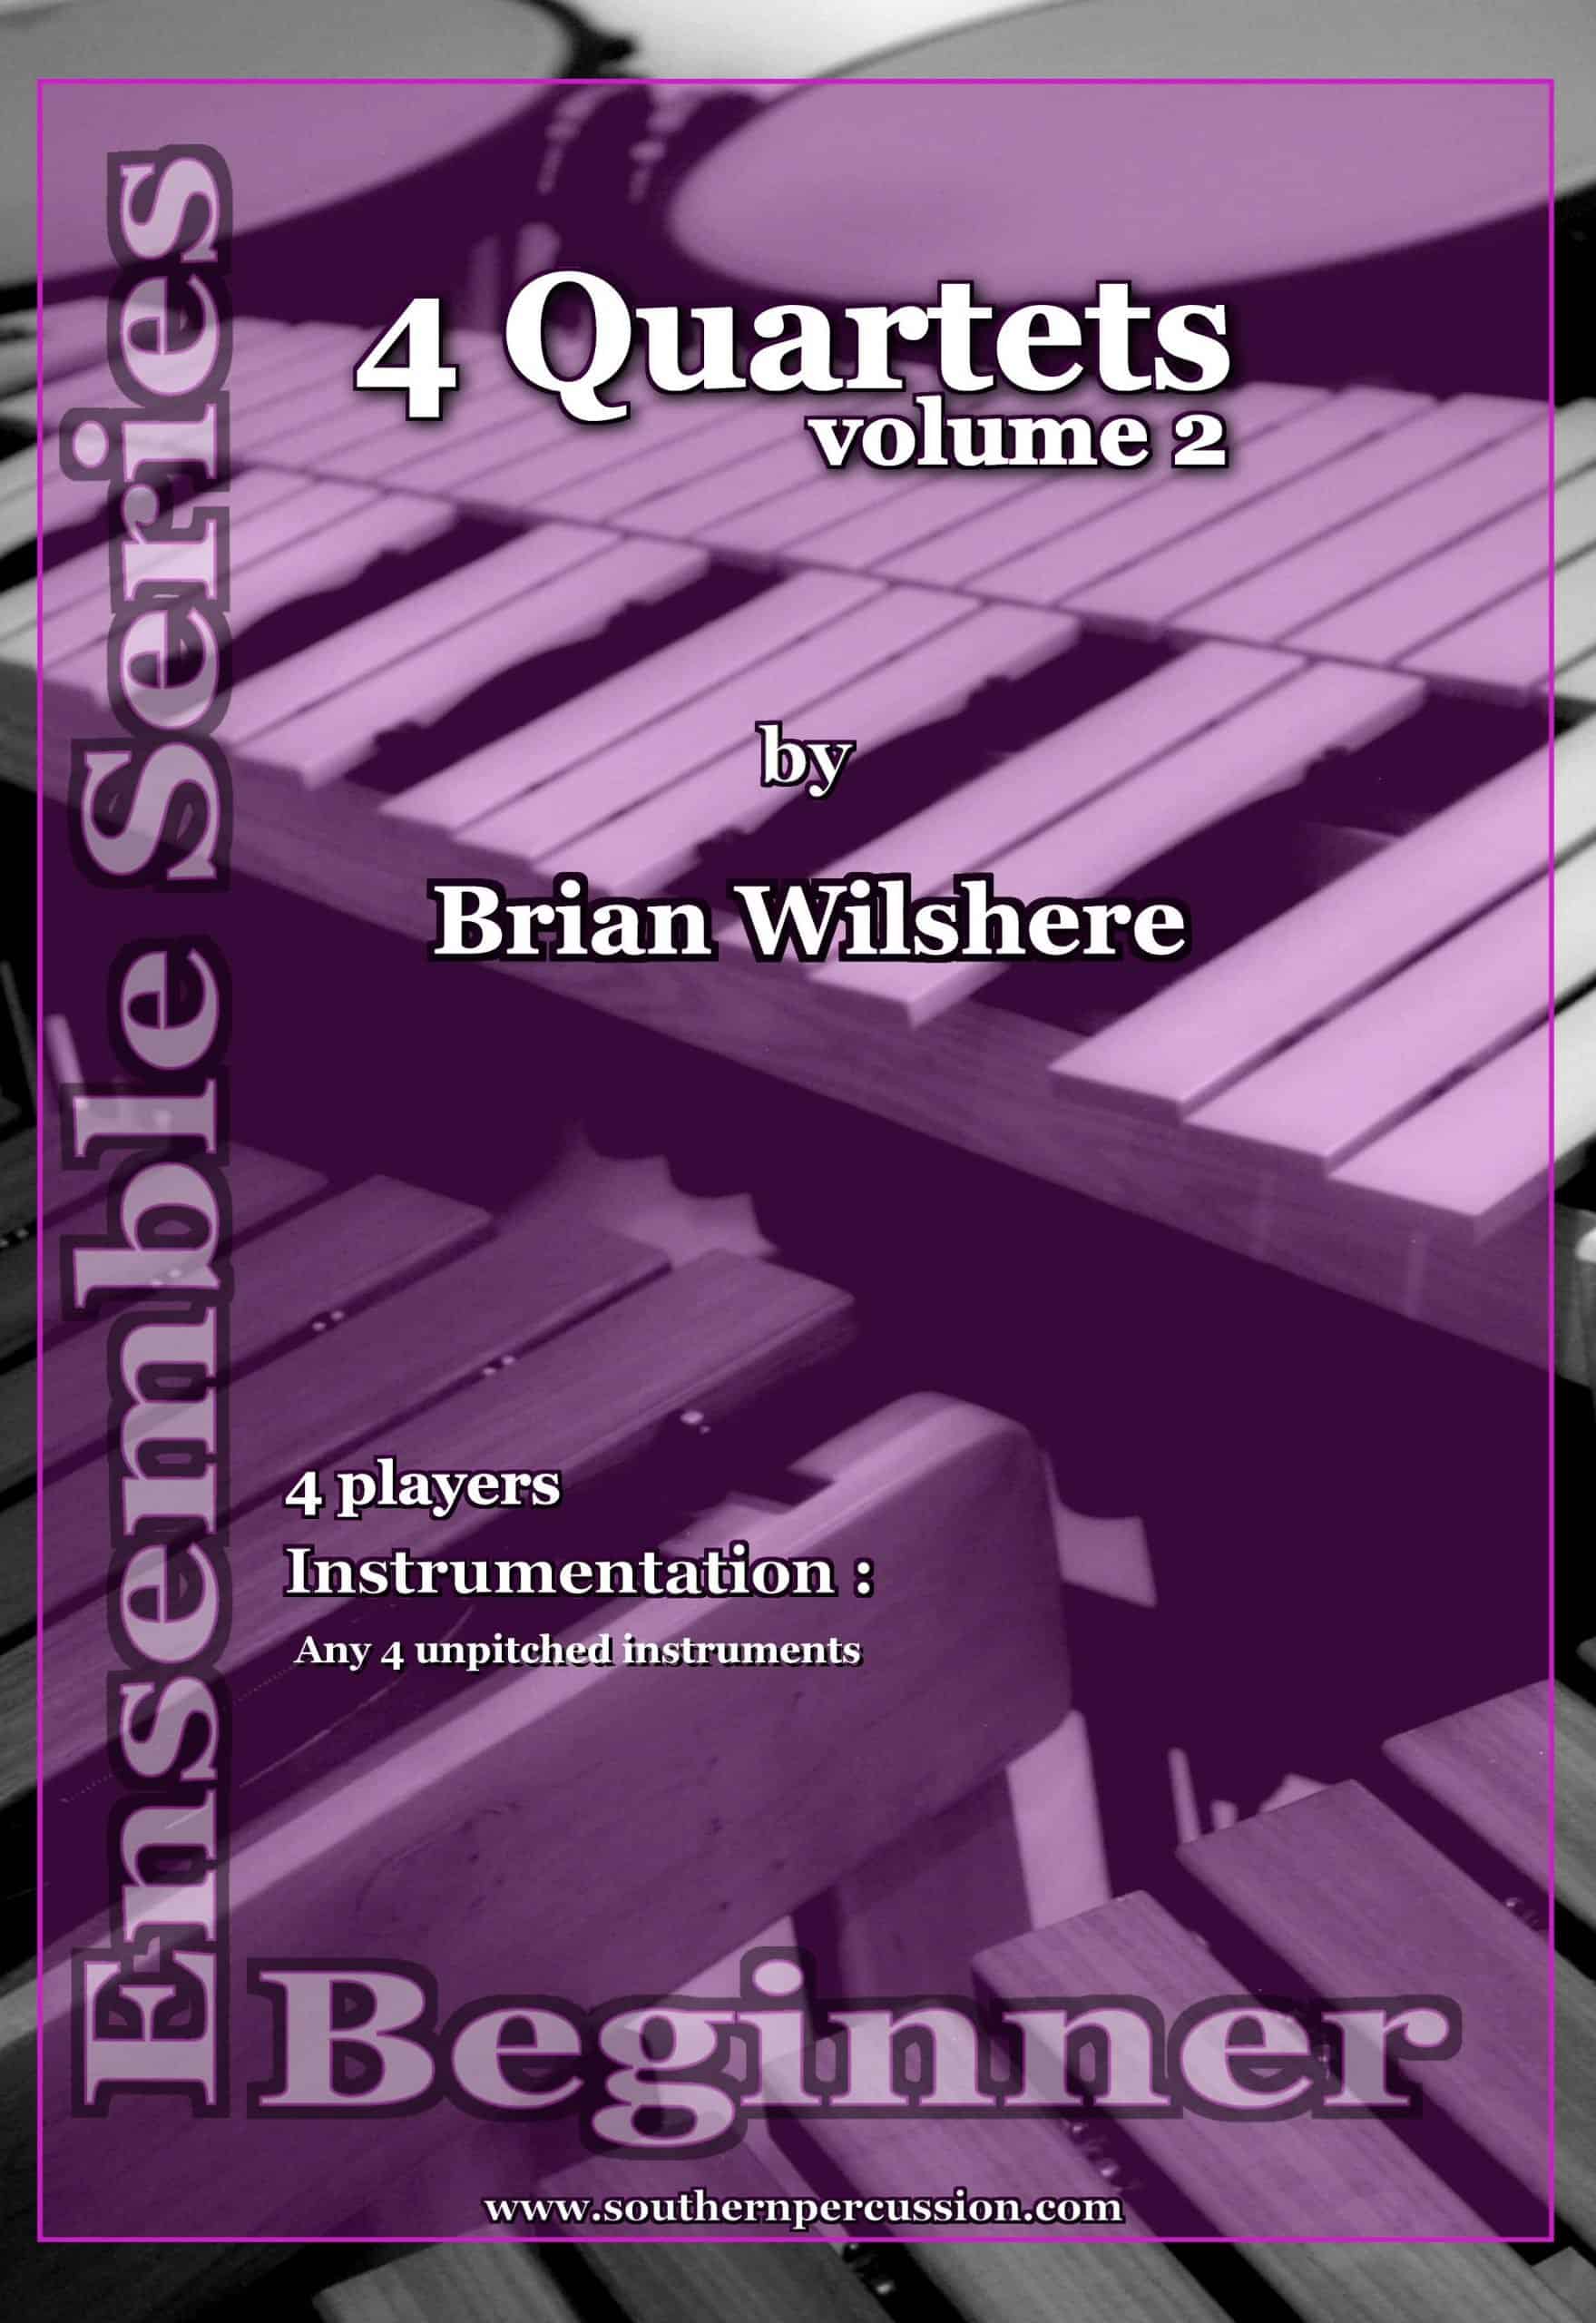 4 Quartets for Percussion - Volume 2 by Brian Wilshere